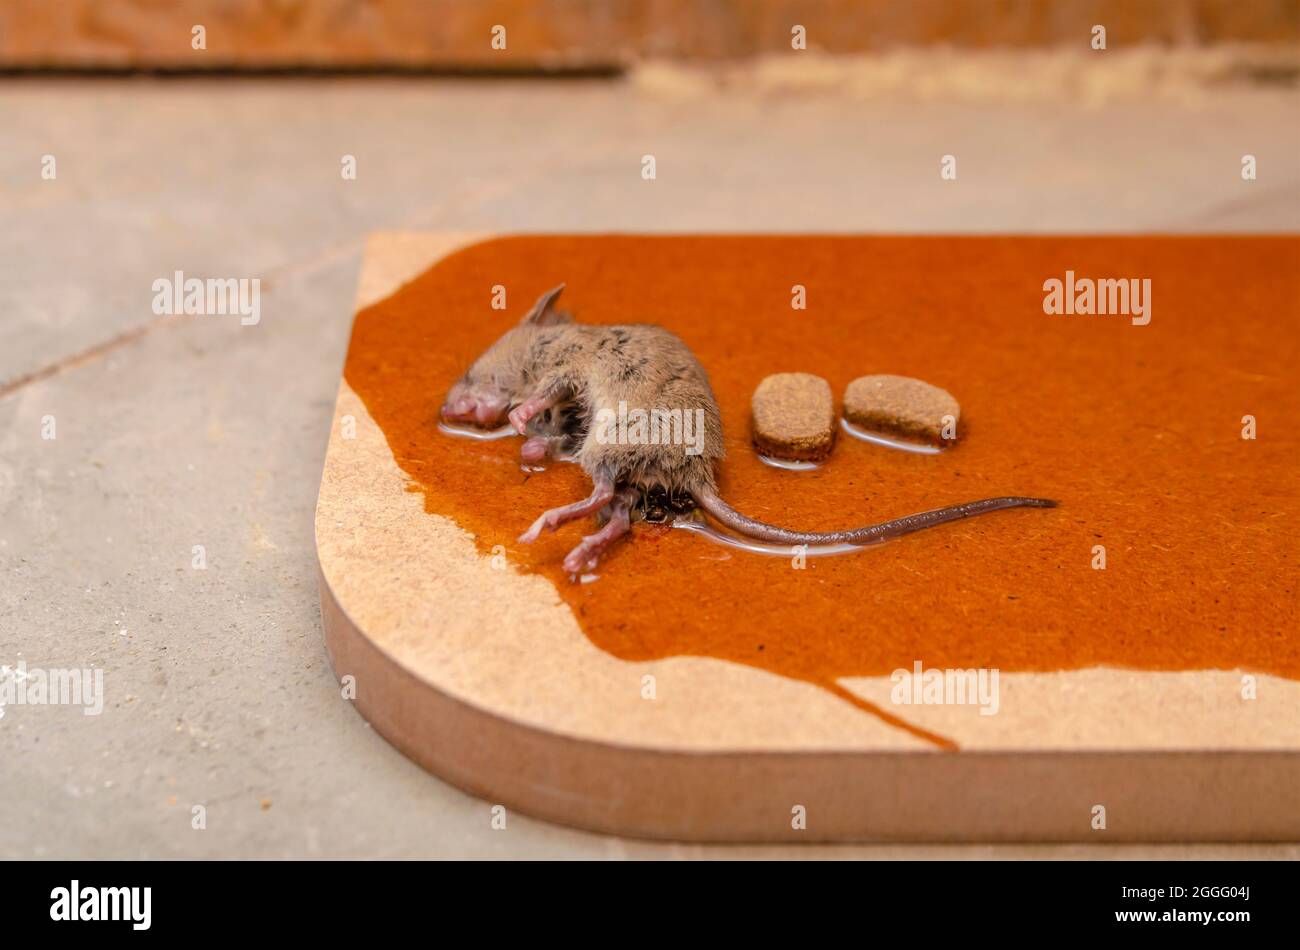 https://c8.alamy.com/comp/2GGG04J/a-mouse-or-rat-is-caught-in-a-glue-trap-with-cookies-as-bait-glue-for-catching-rodents-or-small-pests-2GGG04J.jpg